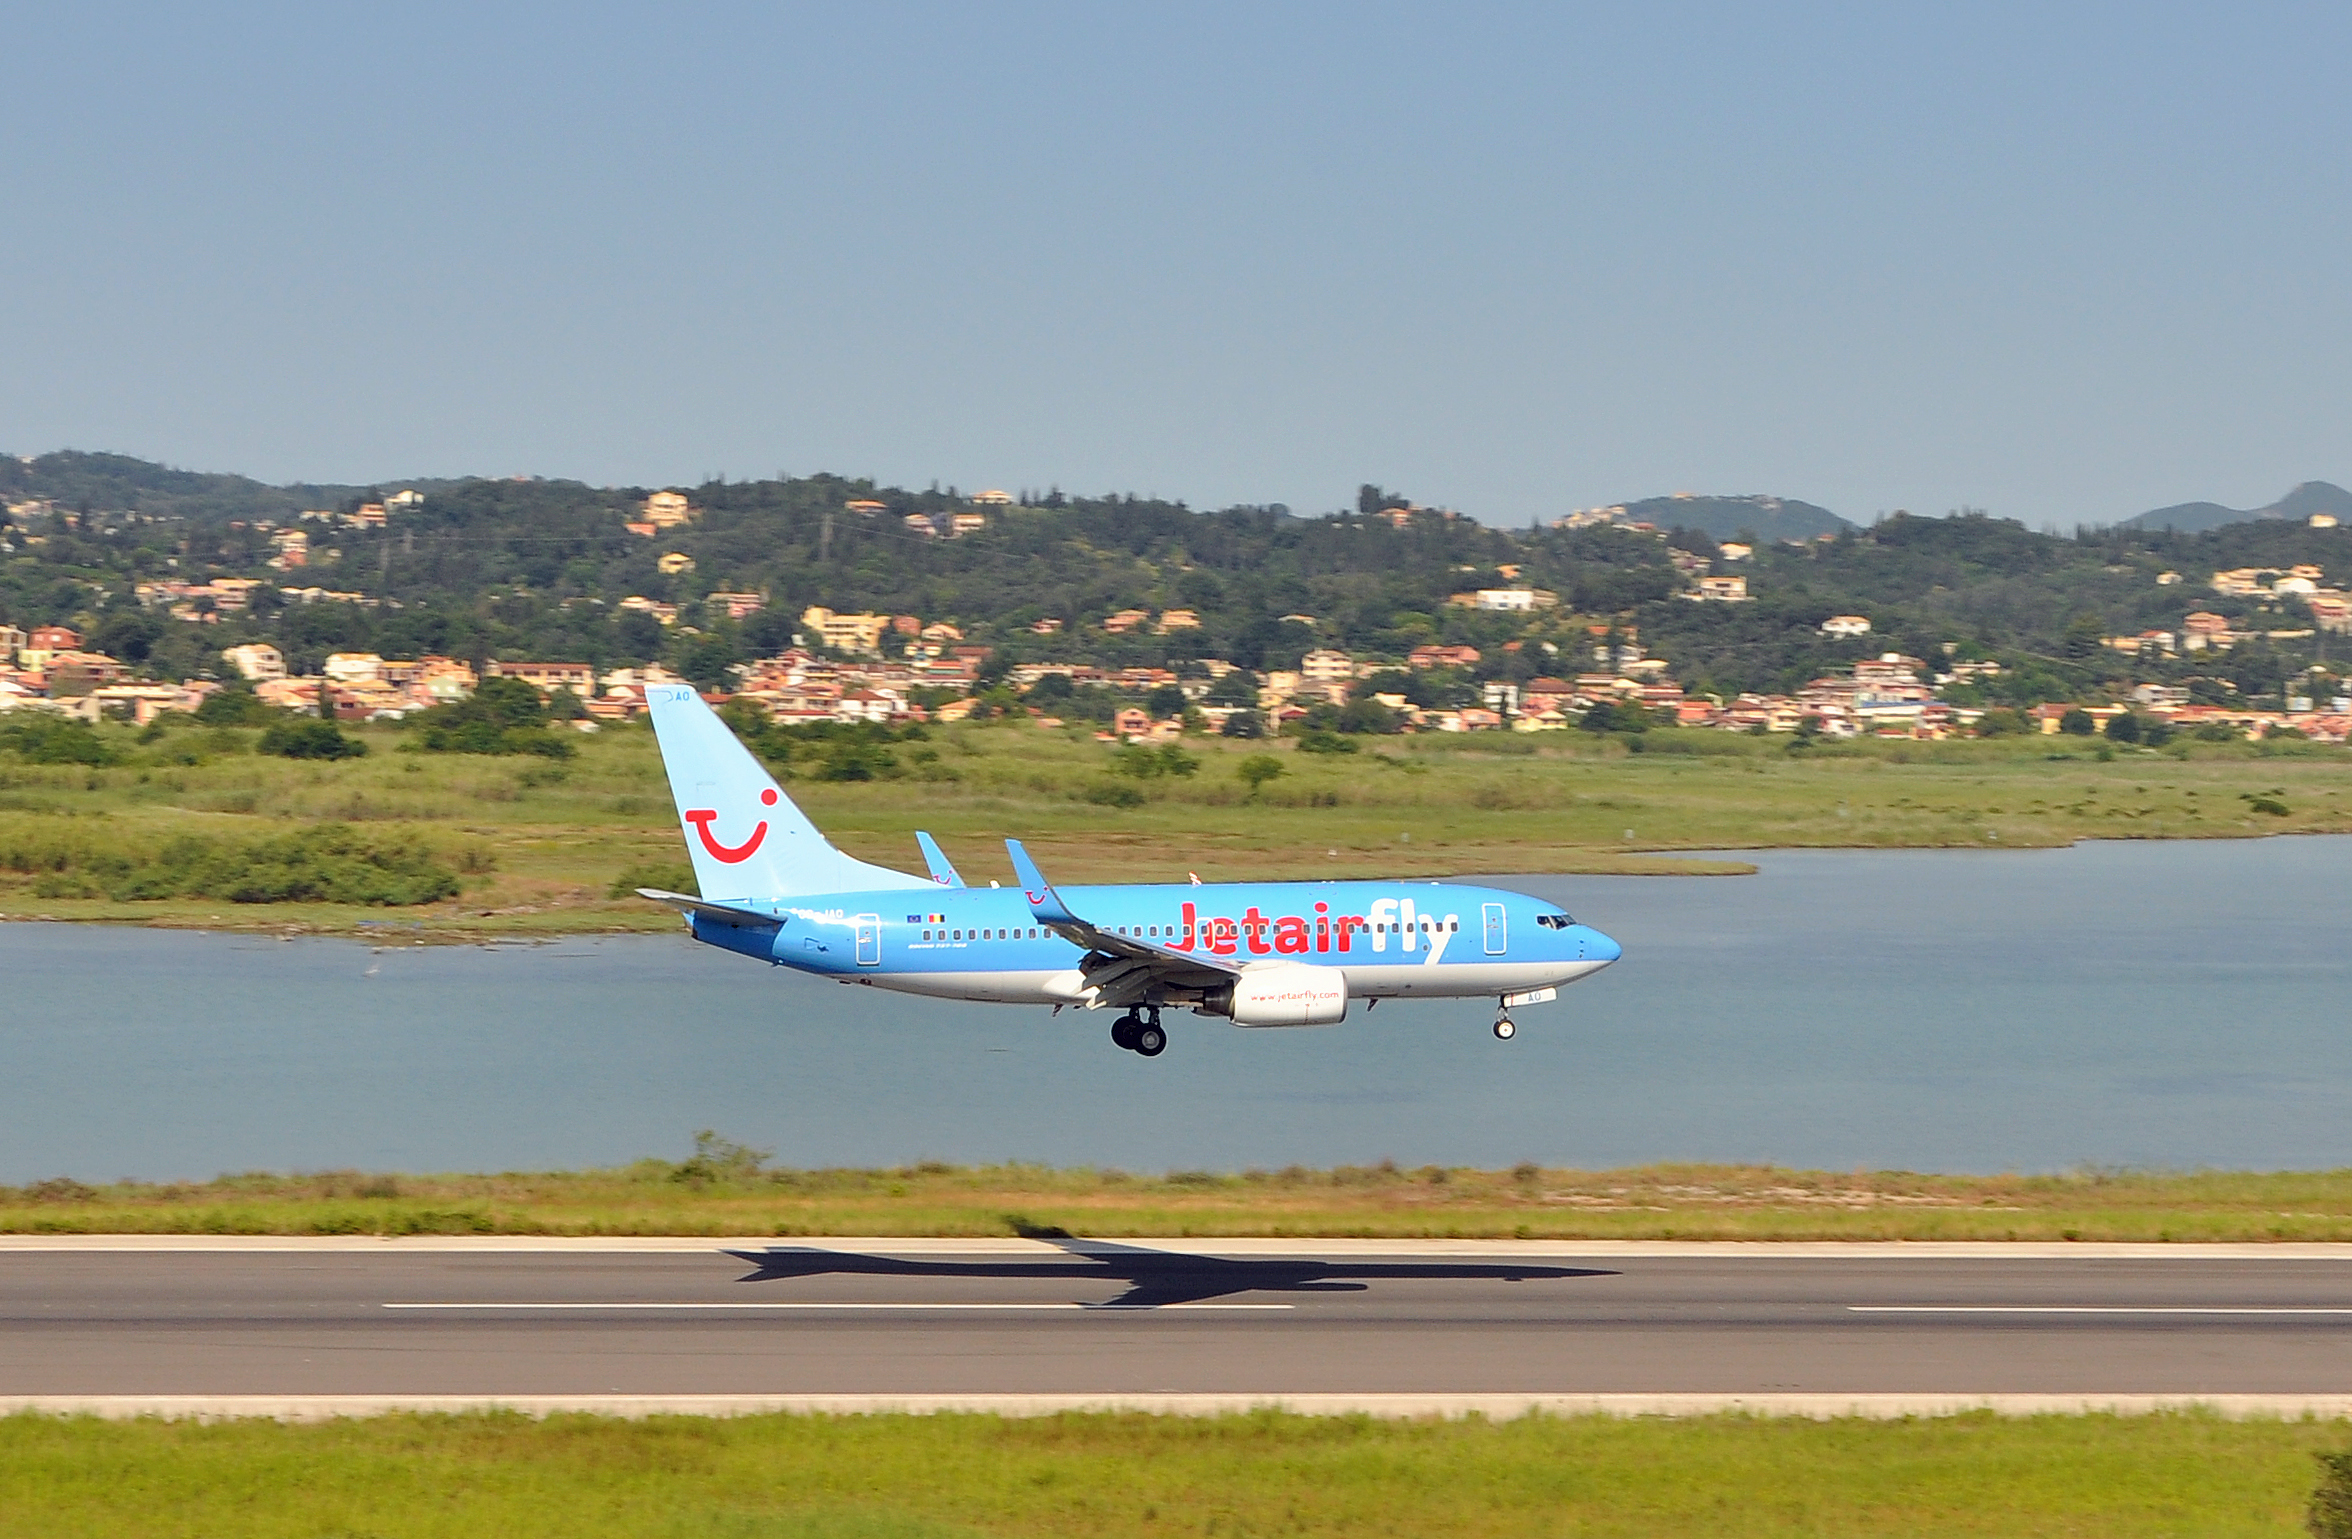 Jetairfly R01